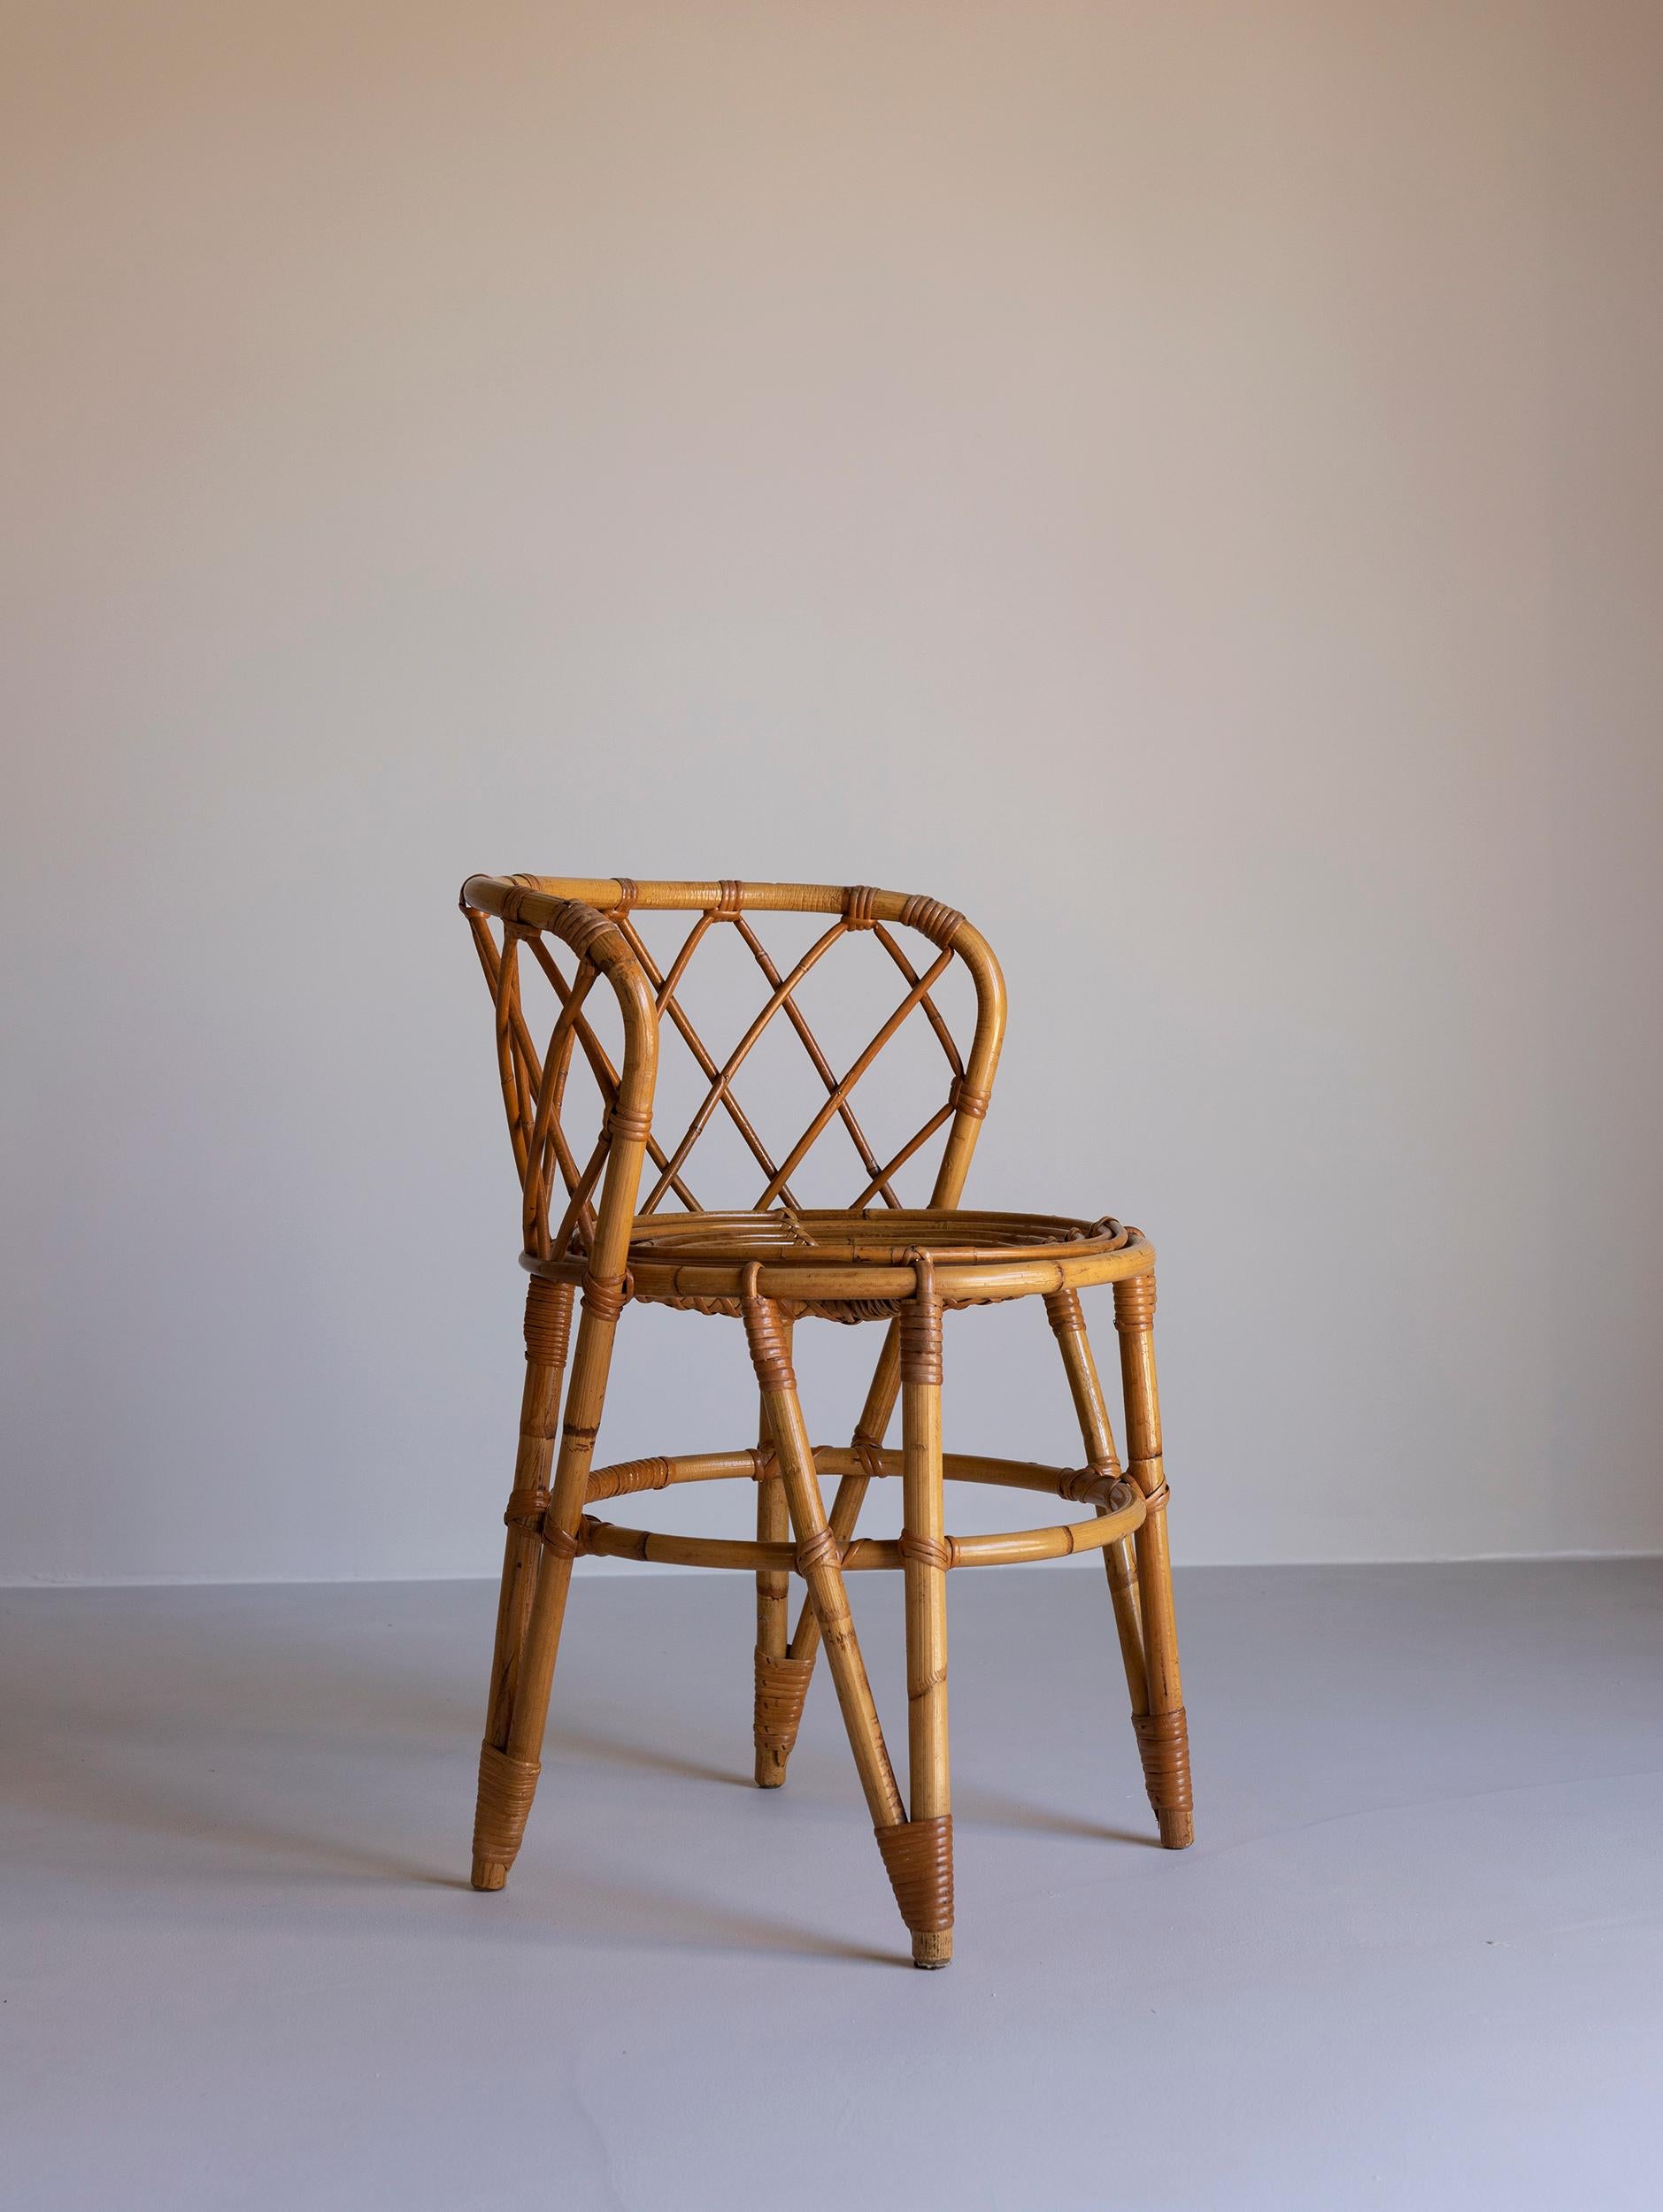 Beautiful rattan chair made in France
Design with a touch of Louis Sognot.